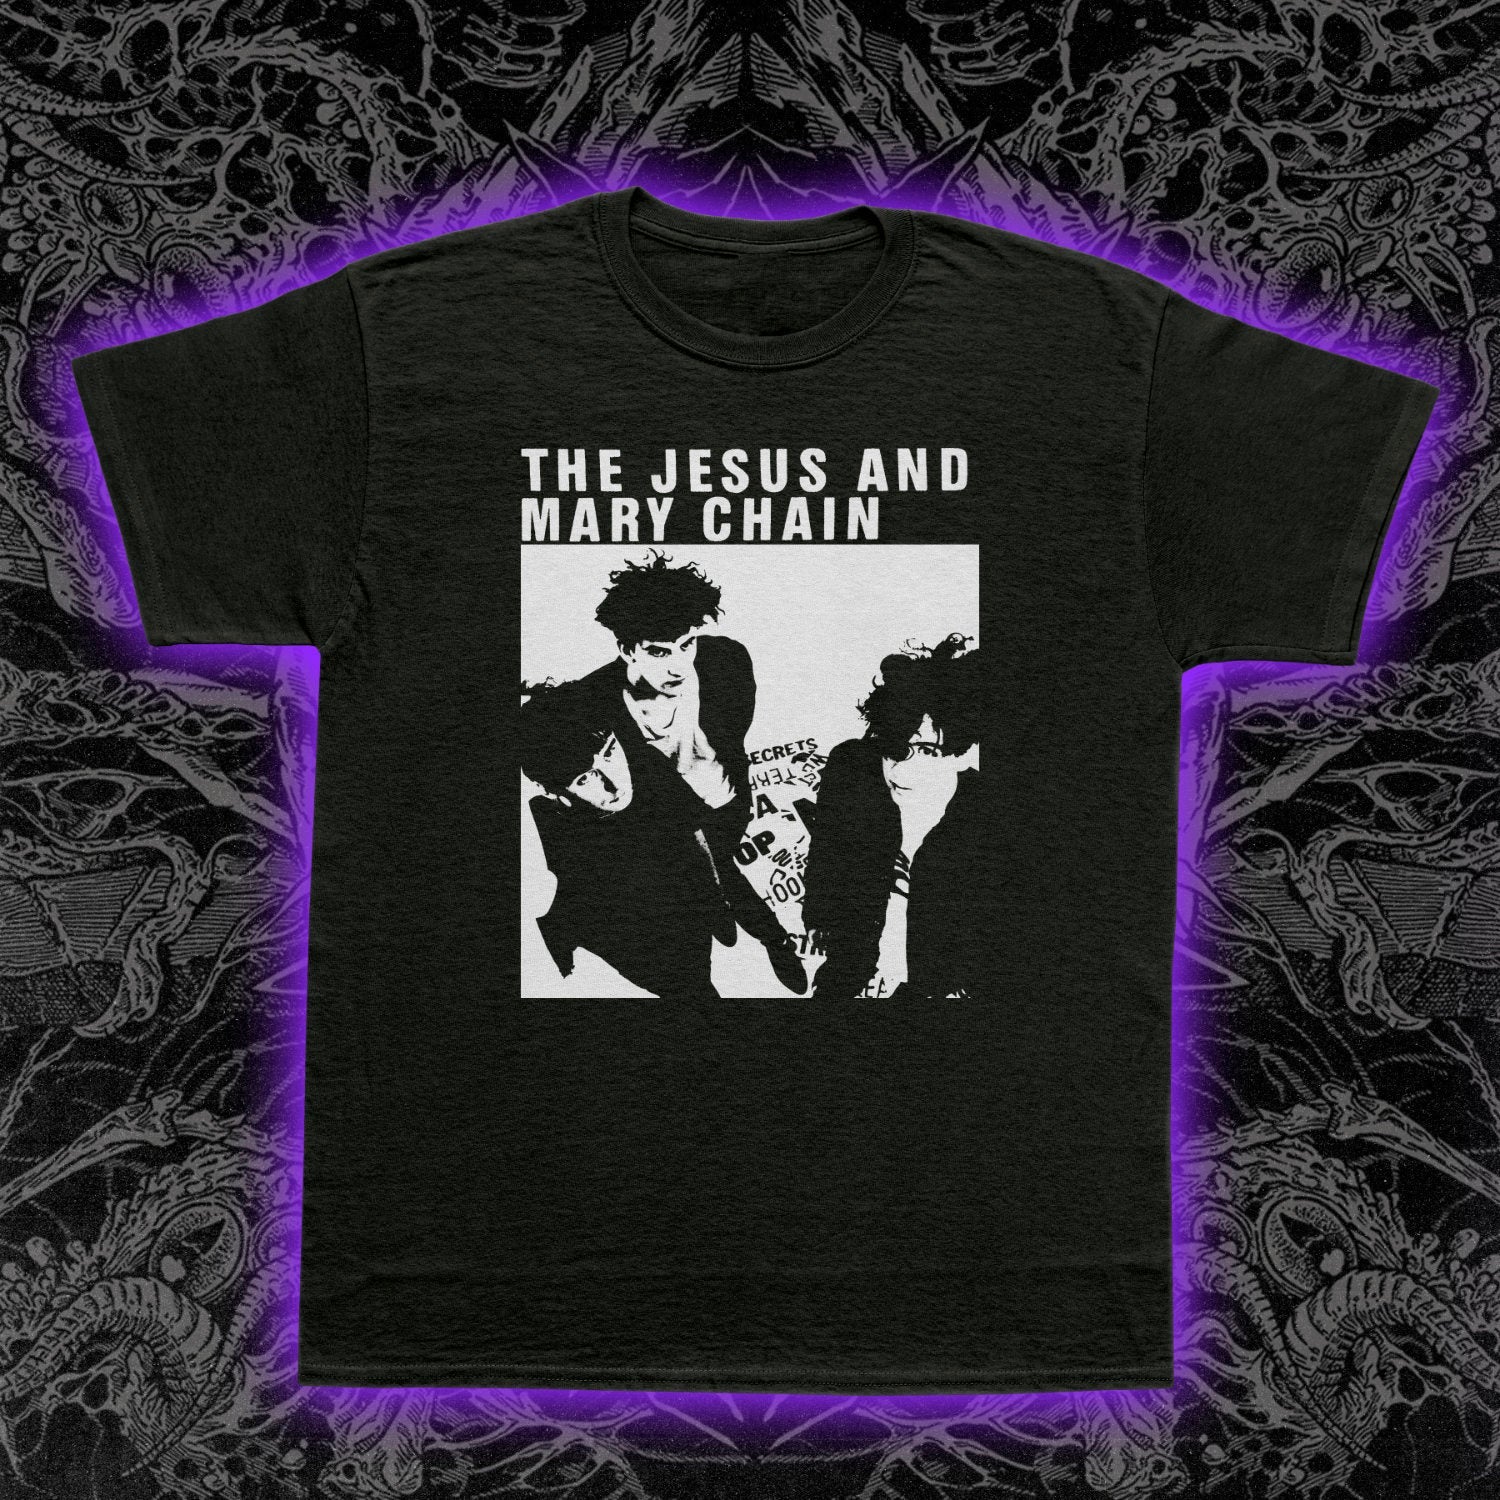 The Jesus And Mary Chain Group Premium Tee